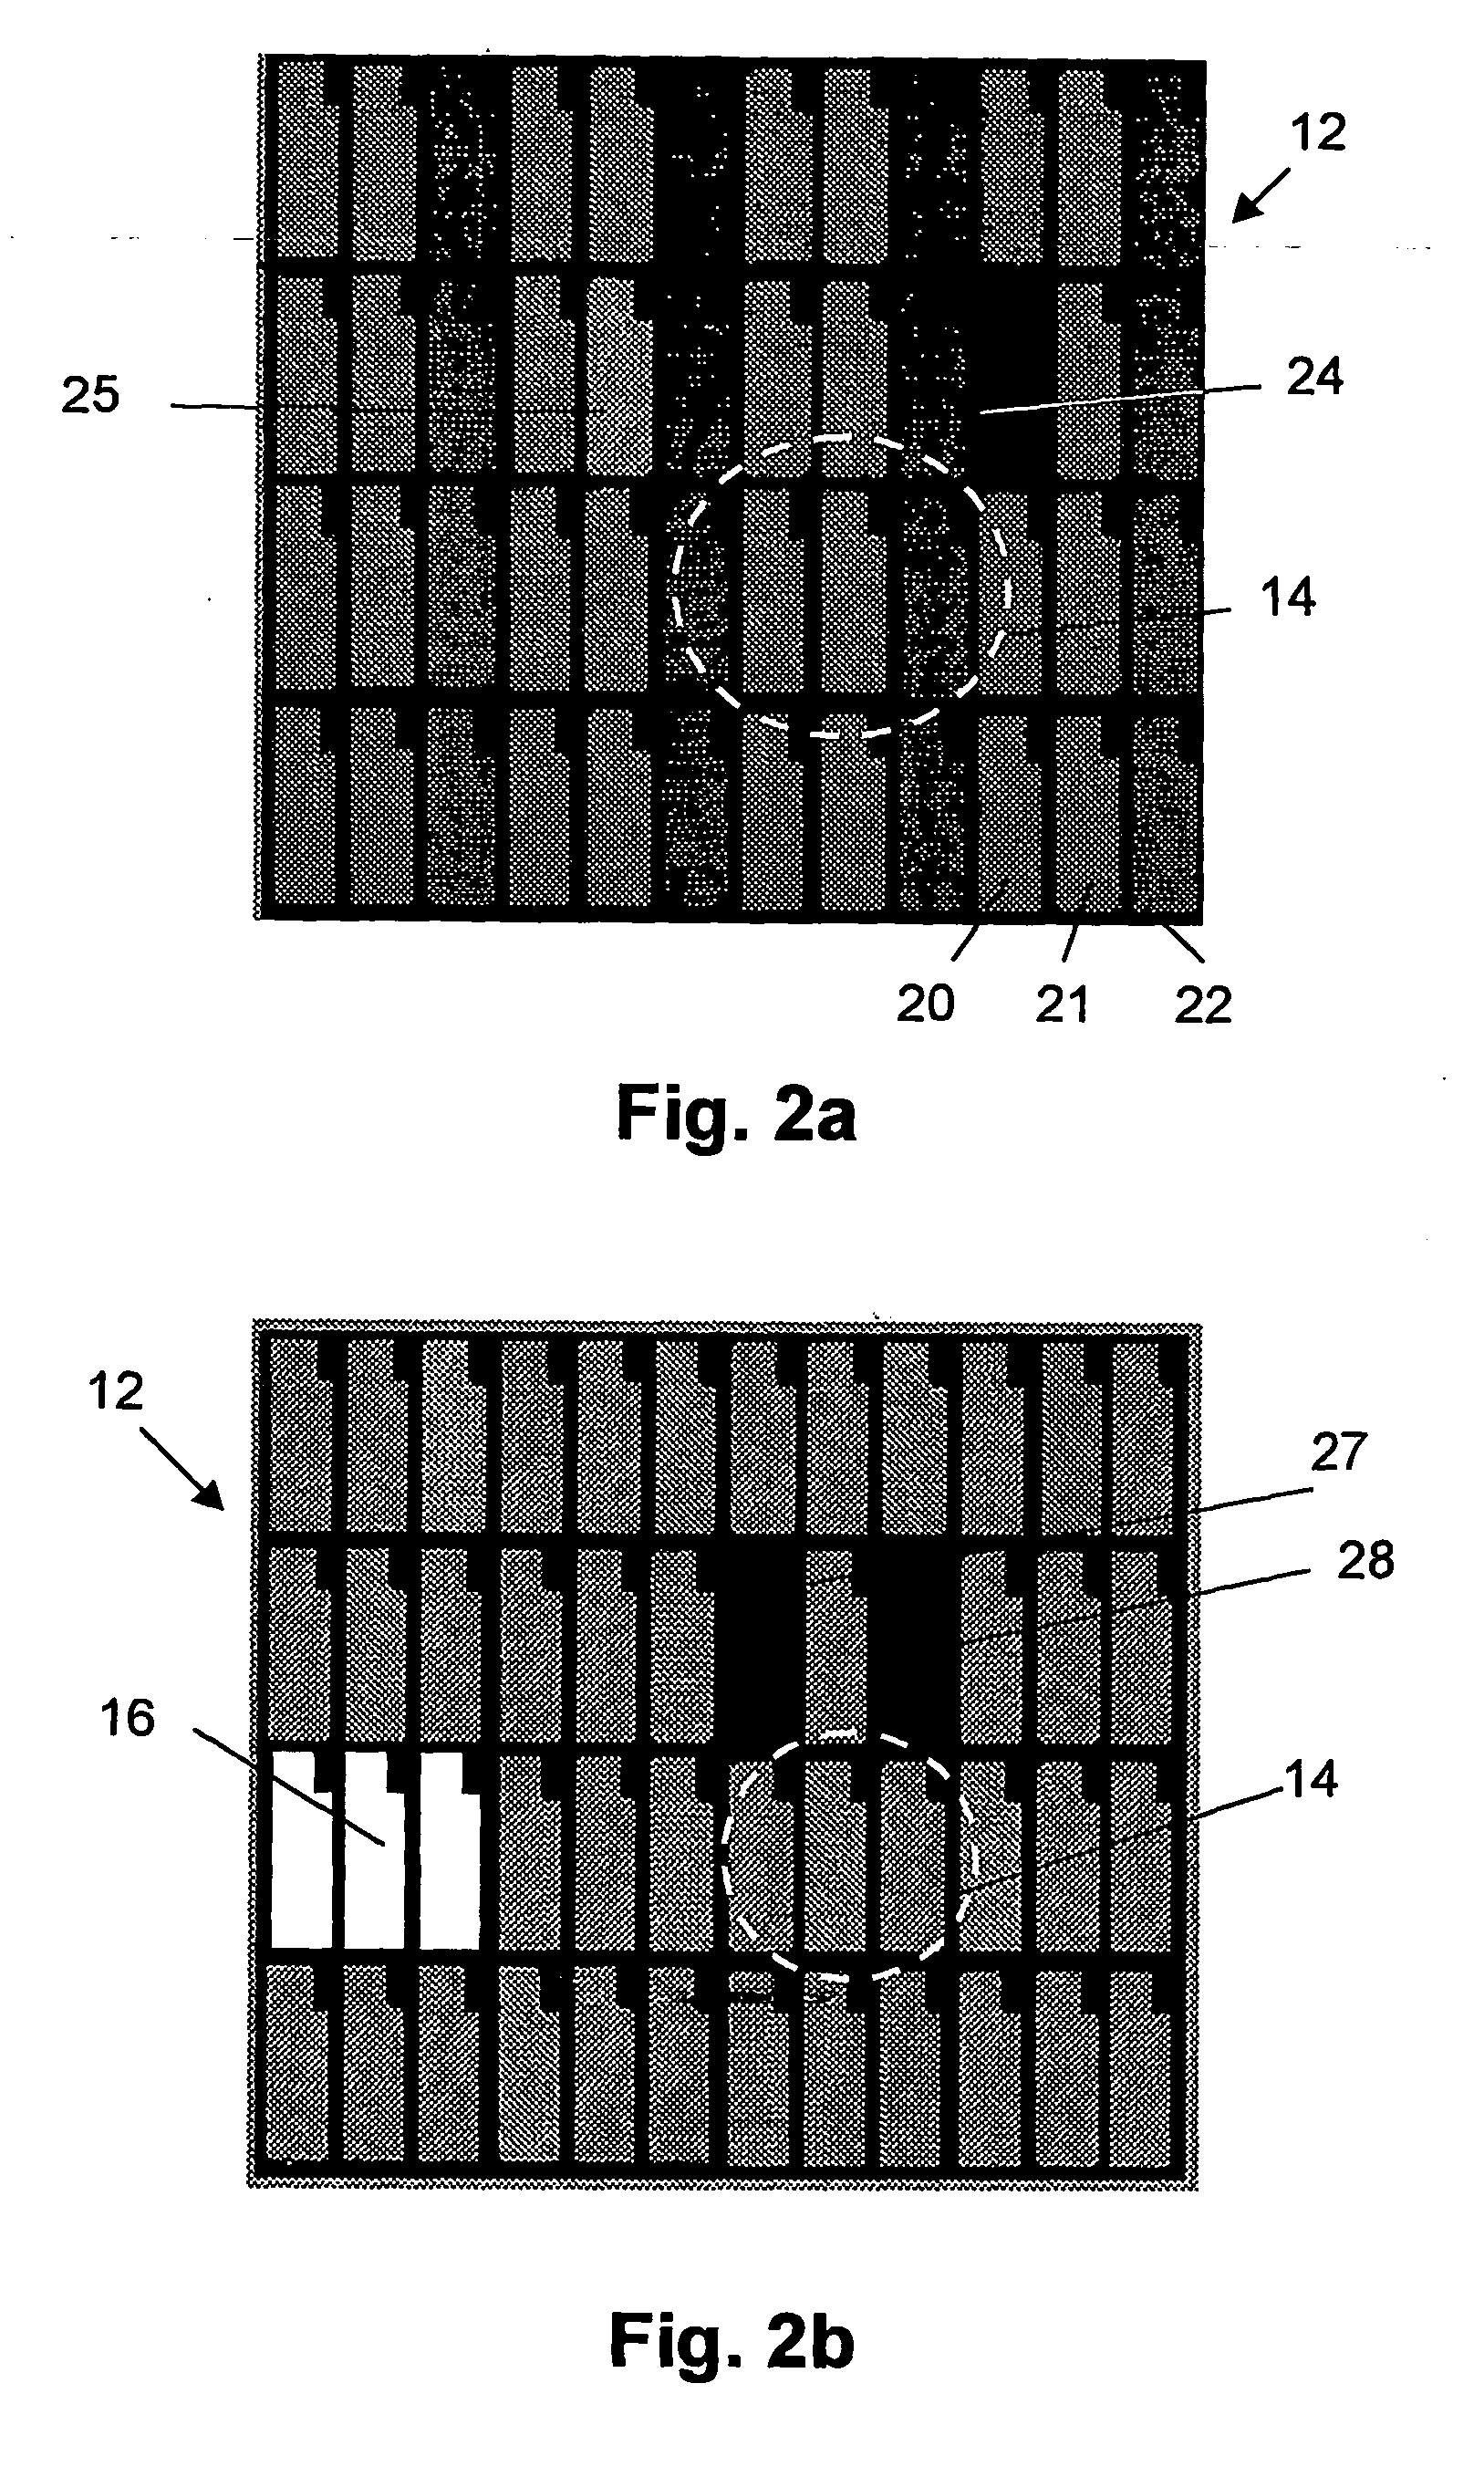 Method and device for visual masking of defects in matrix displays by using characteristics of the human vision system